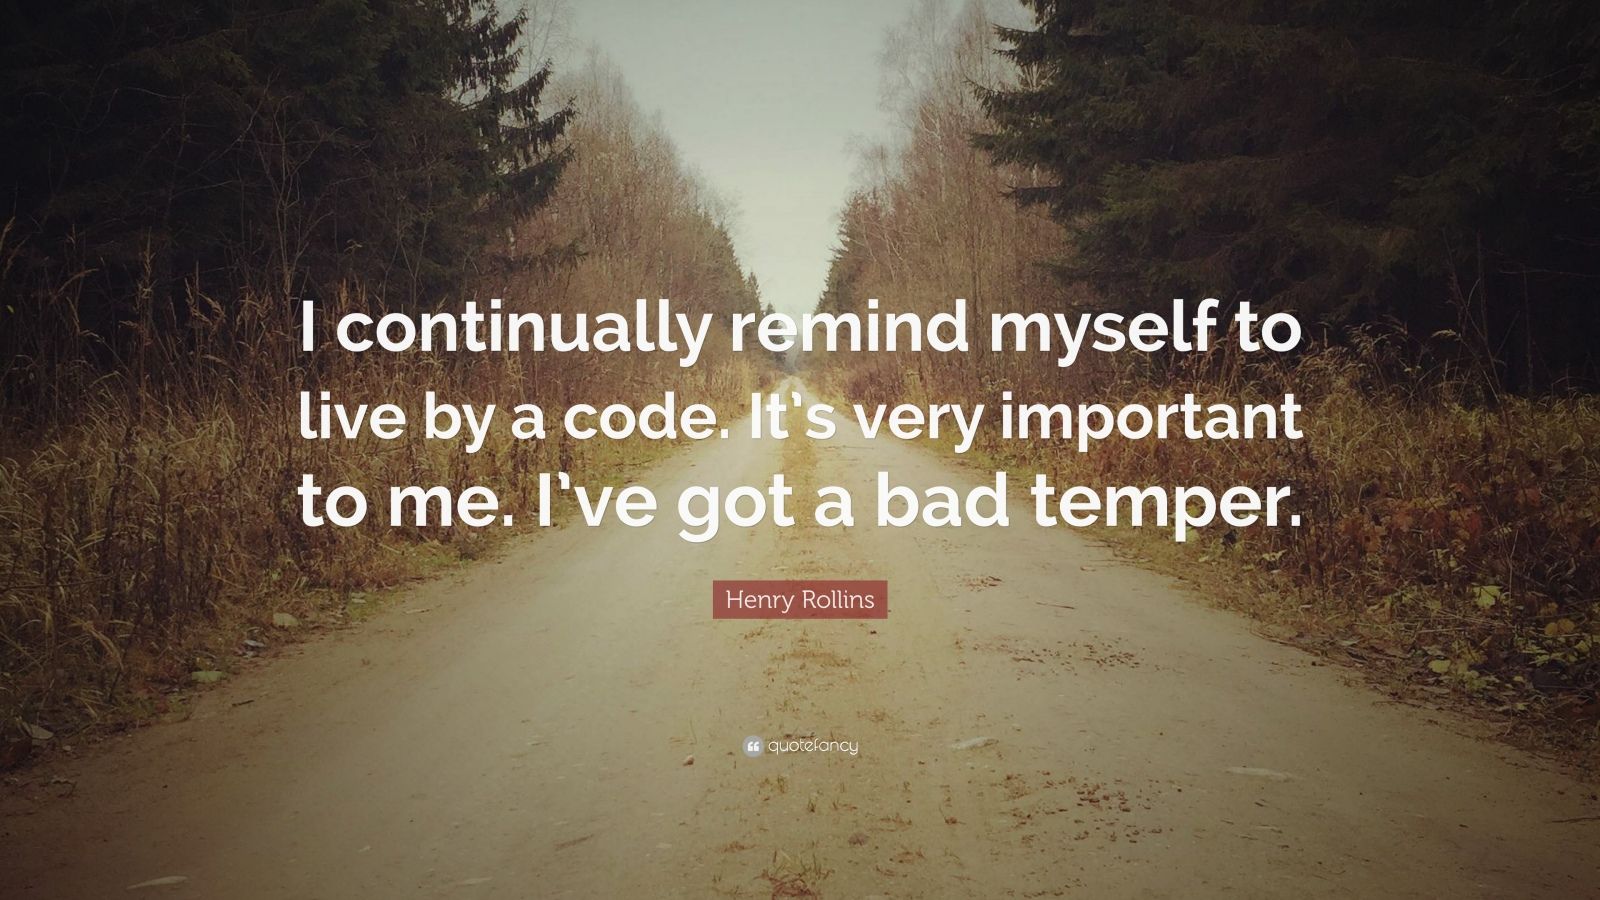 Henry Rollins Quote: “I continually remind myself to live by a code. It